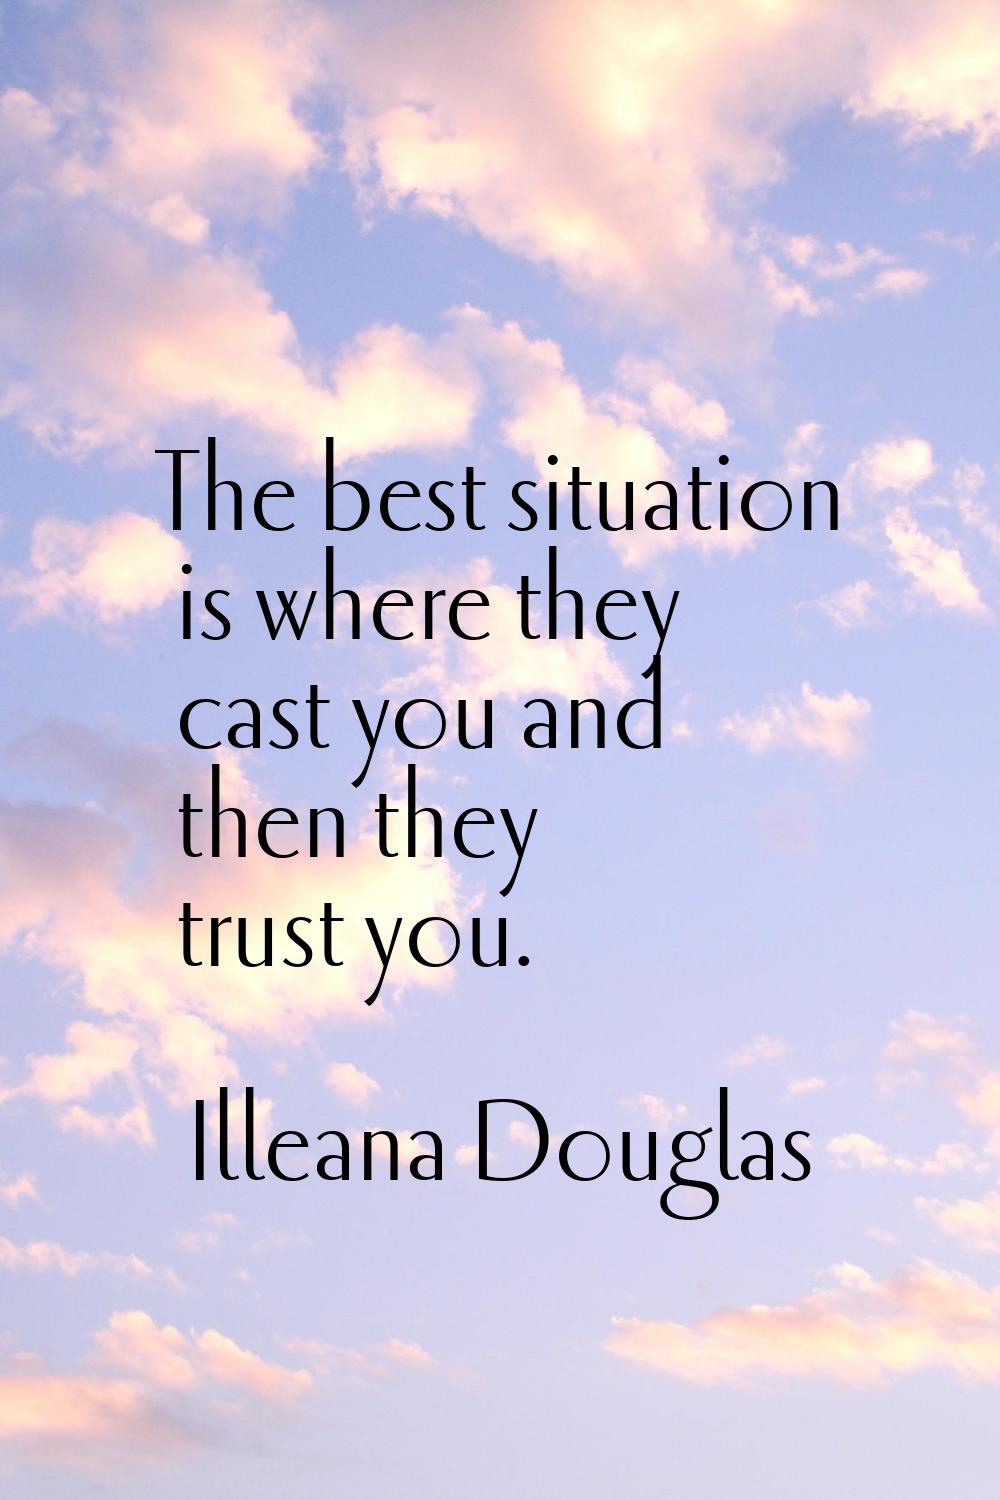 The best situation is where they cast you and then they trust you.